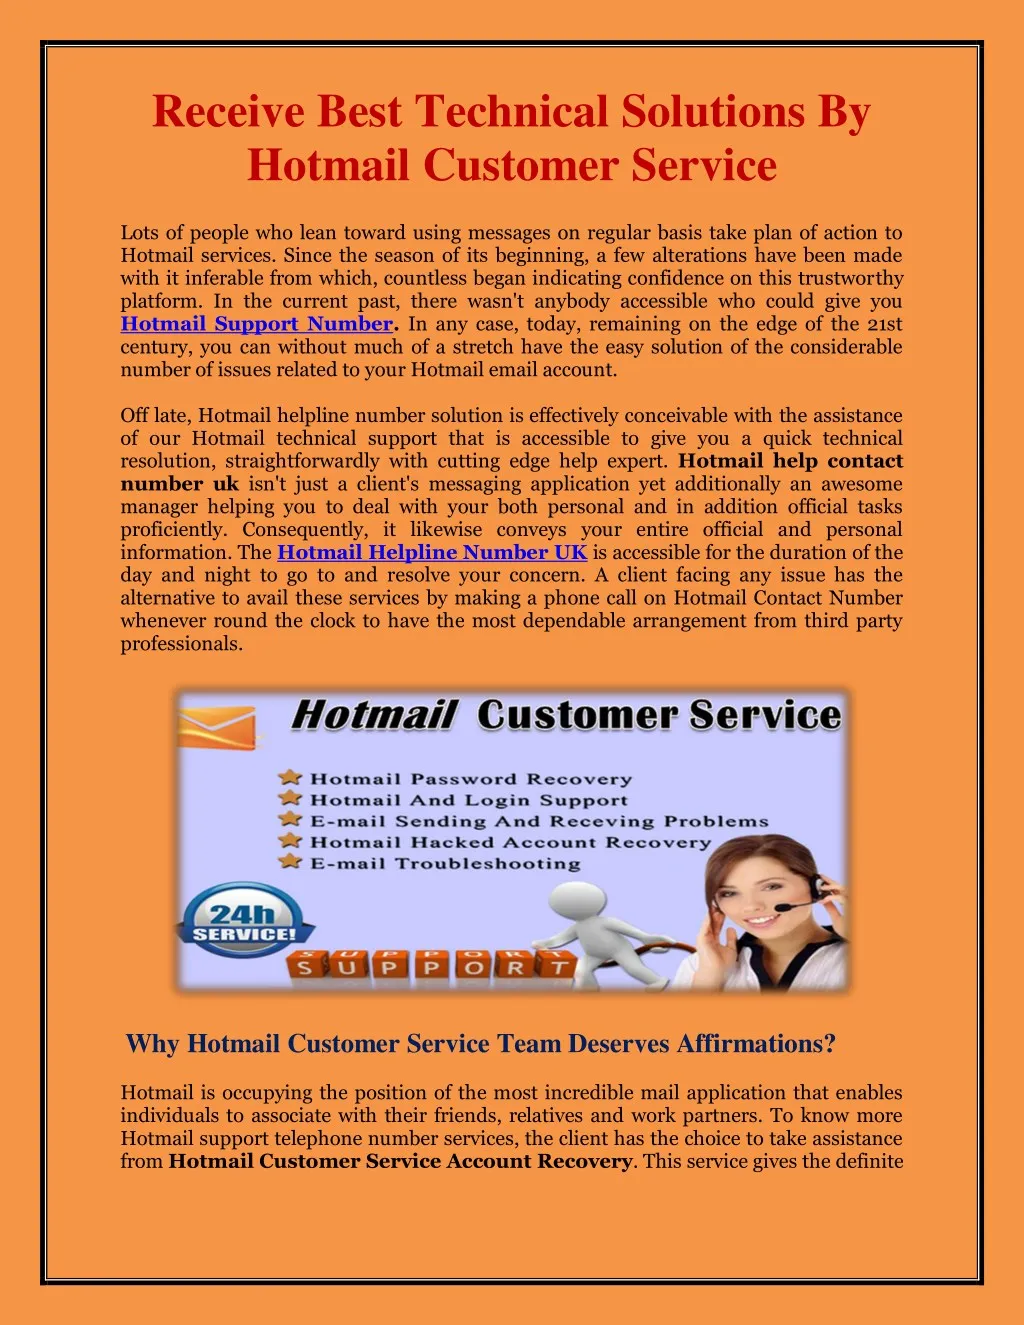 receive best technical solutions by hotmail